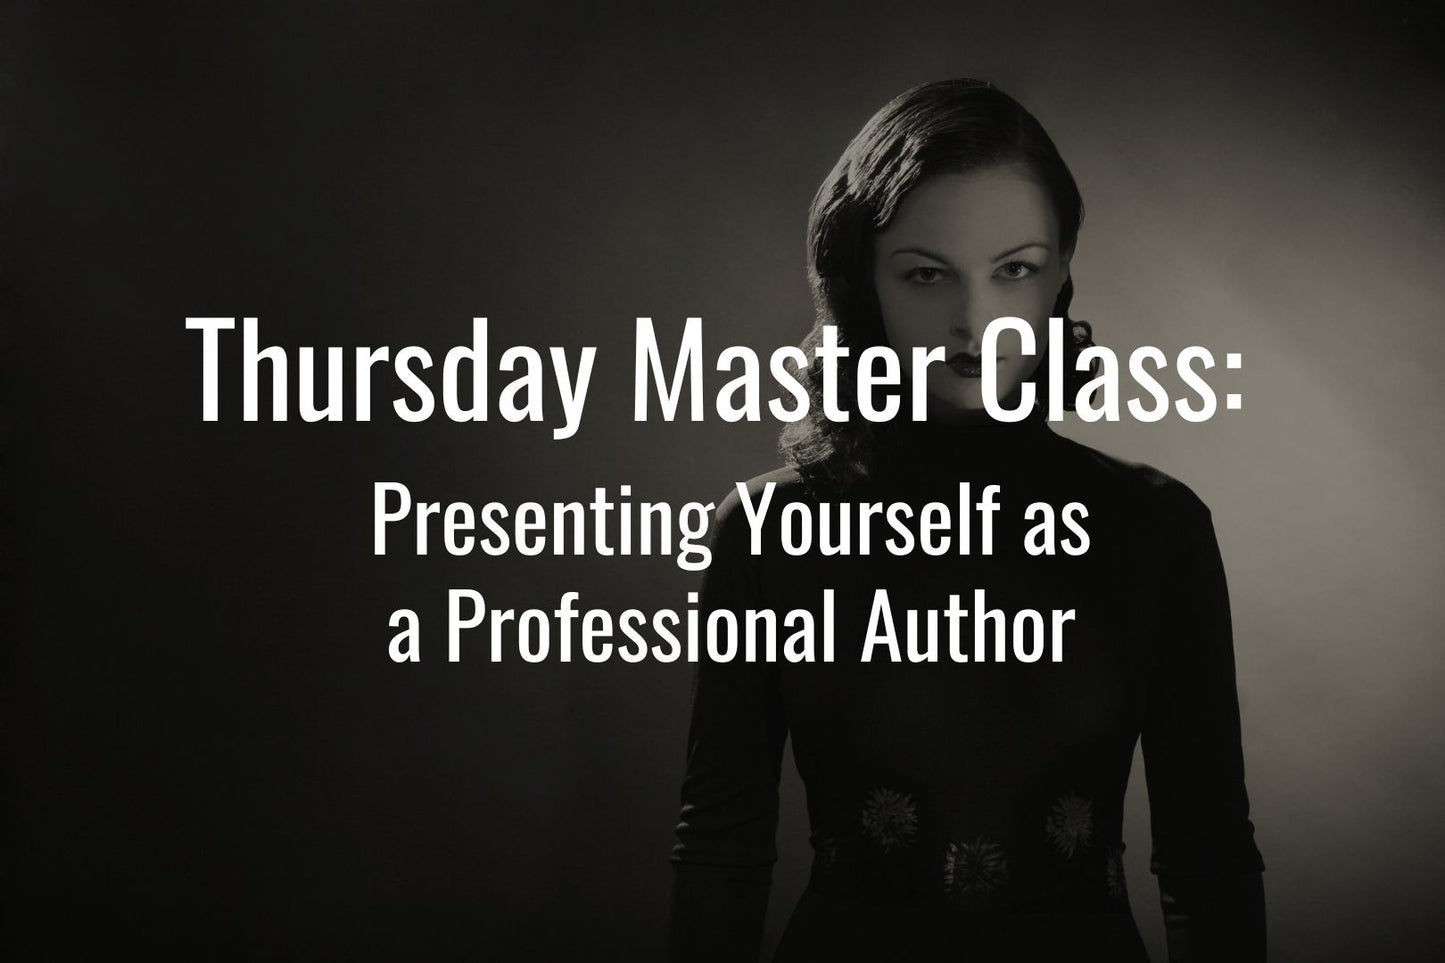 Thursday Master Class: Presenting Yourself as a Professional Author